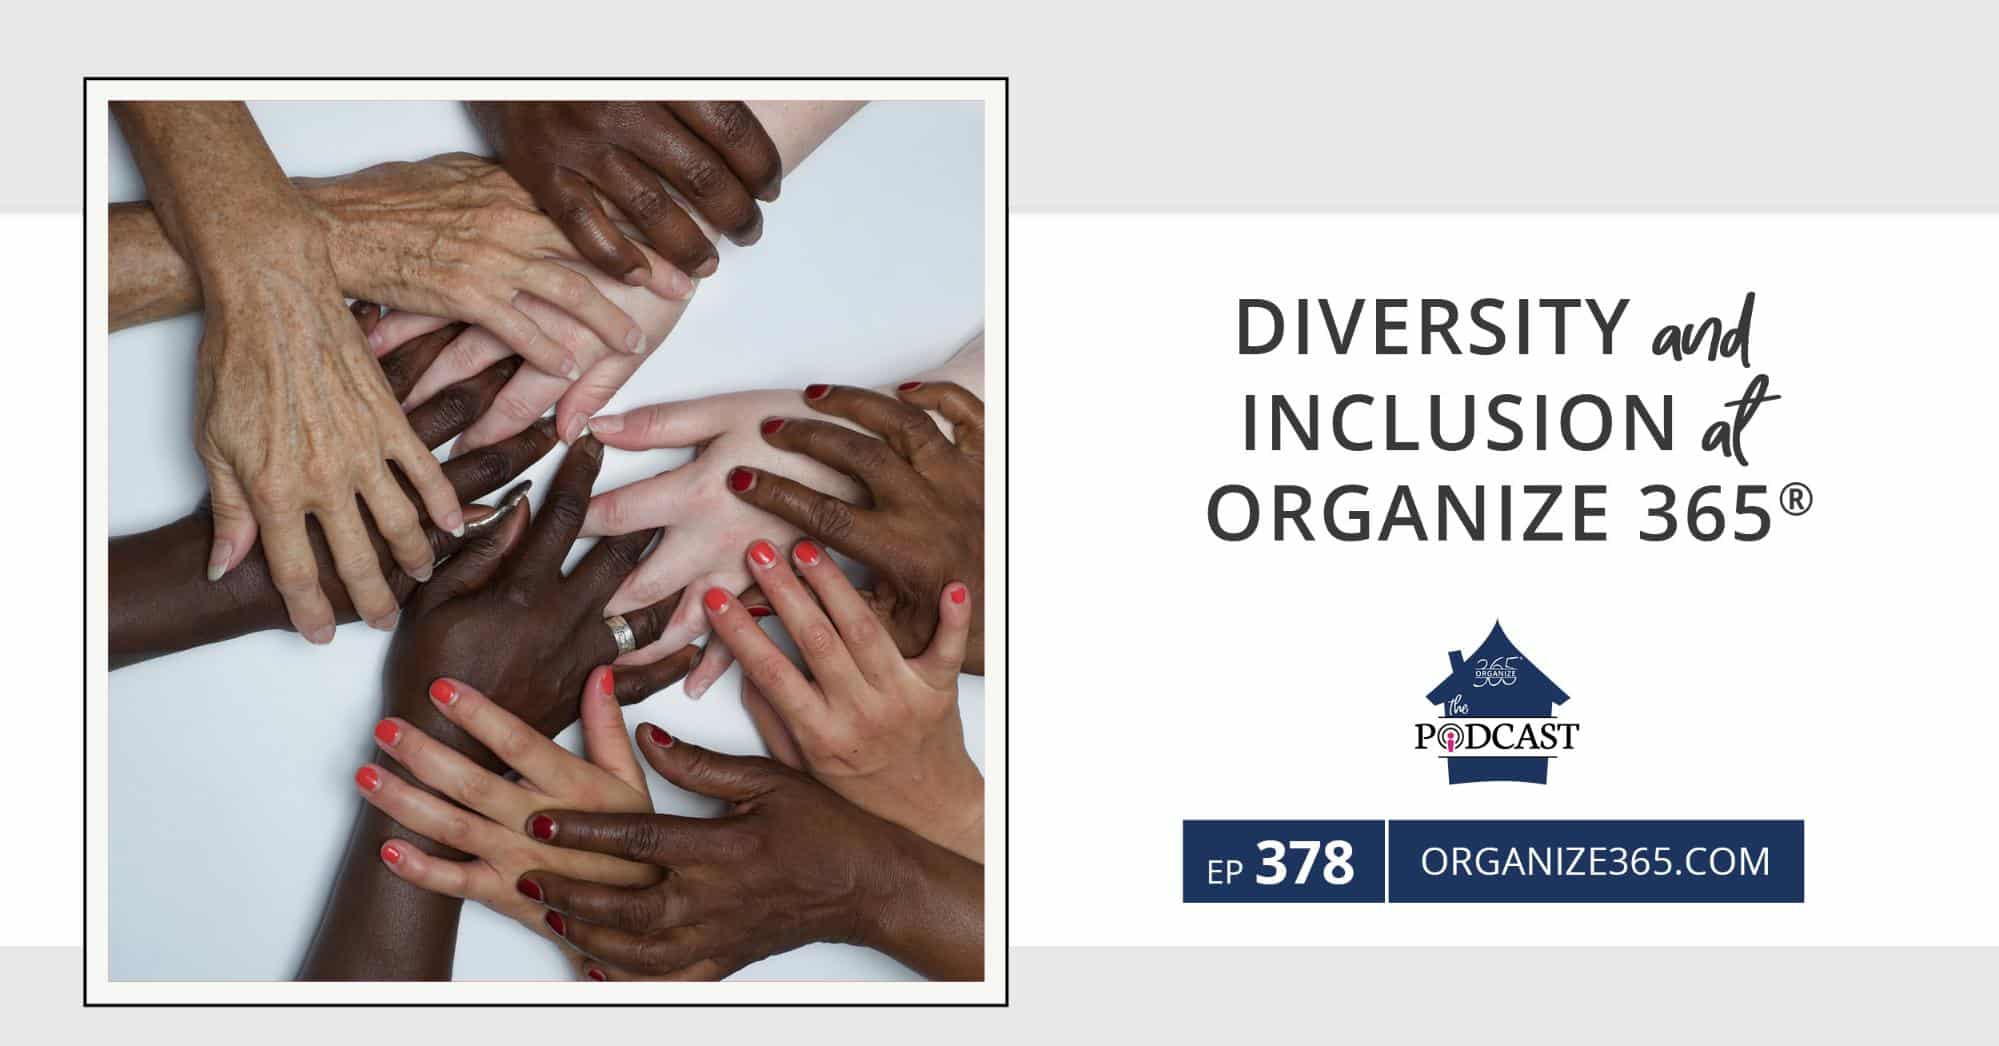 Diversity-and-Inclusion-at-Organize-365-photo-1